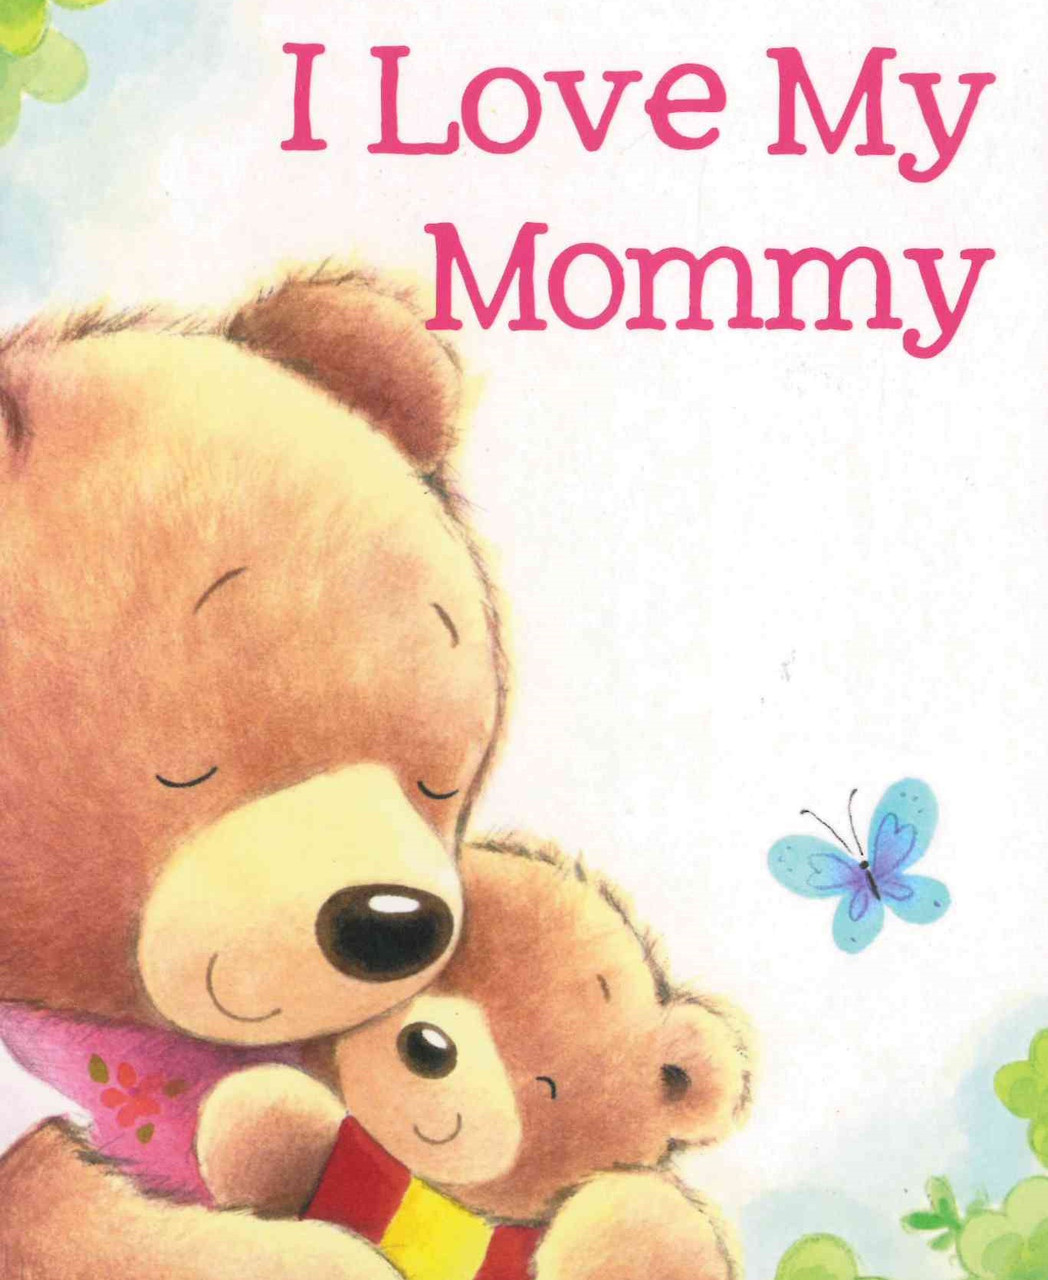 https://cdn11.bigcommerce.com/s-0f1b1/images/stencil/1280x1280/products/15607/121088/Y2159_I_Love_My_Mommy_Front__40208.1693231235.jpg?c=2